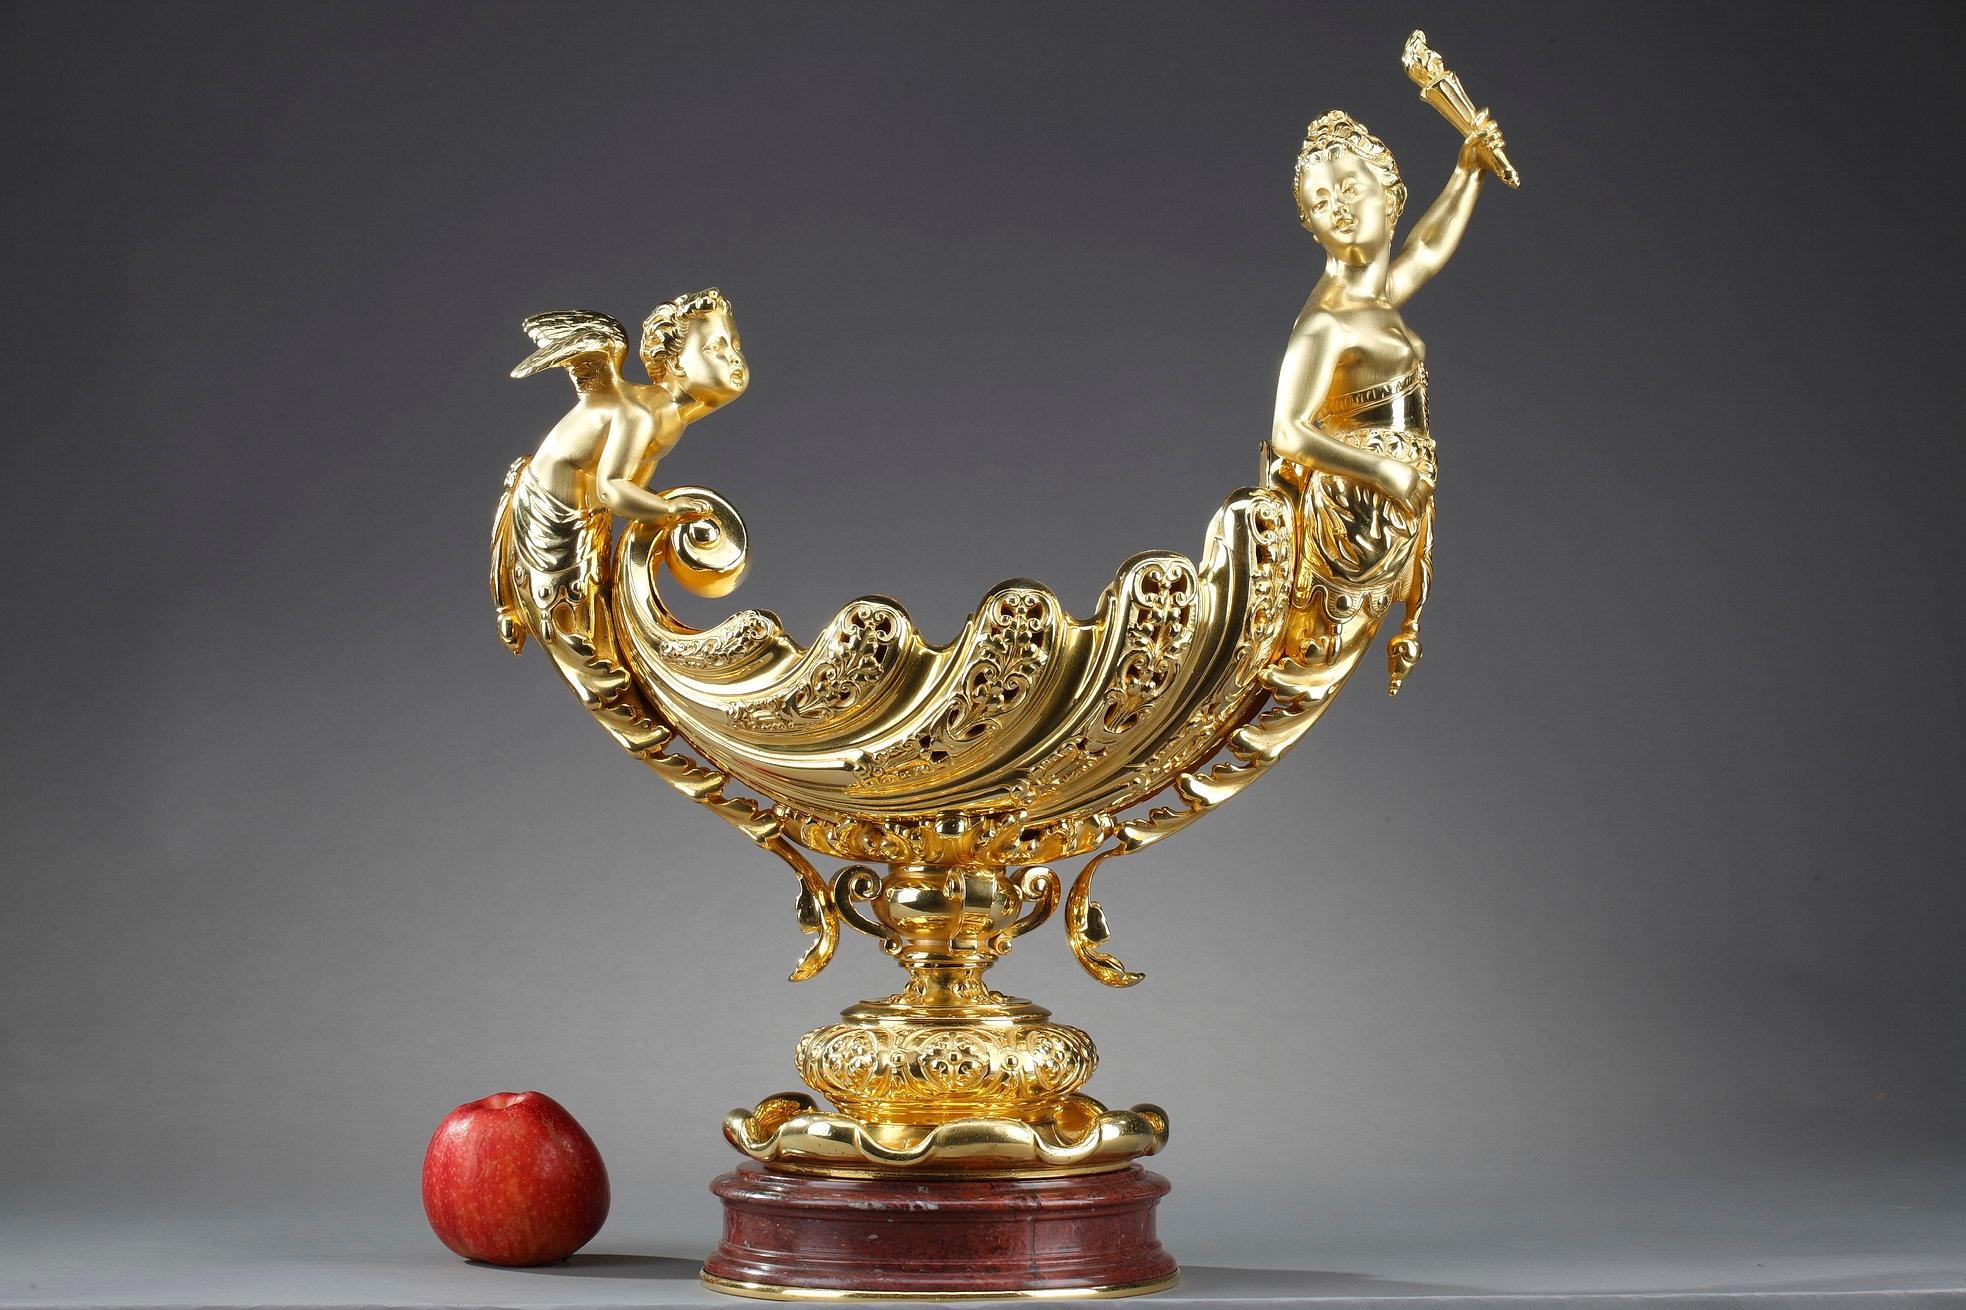 Gilt bronze or ormolu cup featuring Cupid and Aurora holding a torch. In Roman mythology, Aurora is the goddess of dawn and sister of the Sun. Every morning, she flies across the sky, announcing the arrival of the Sun. The cup symbolizes the chariot